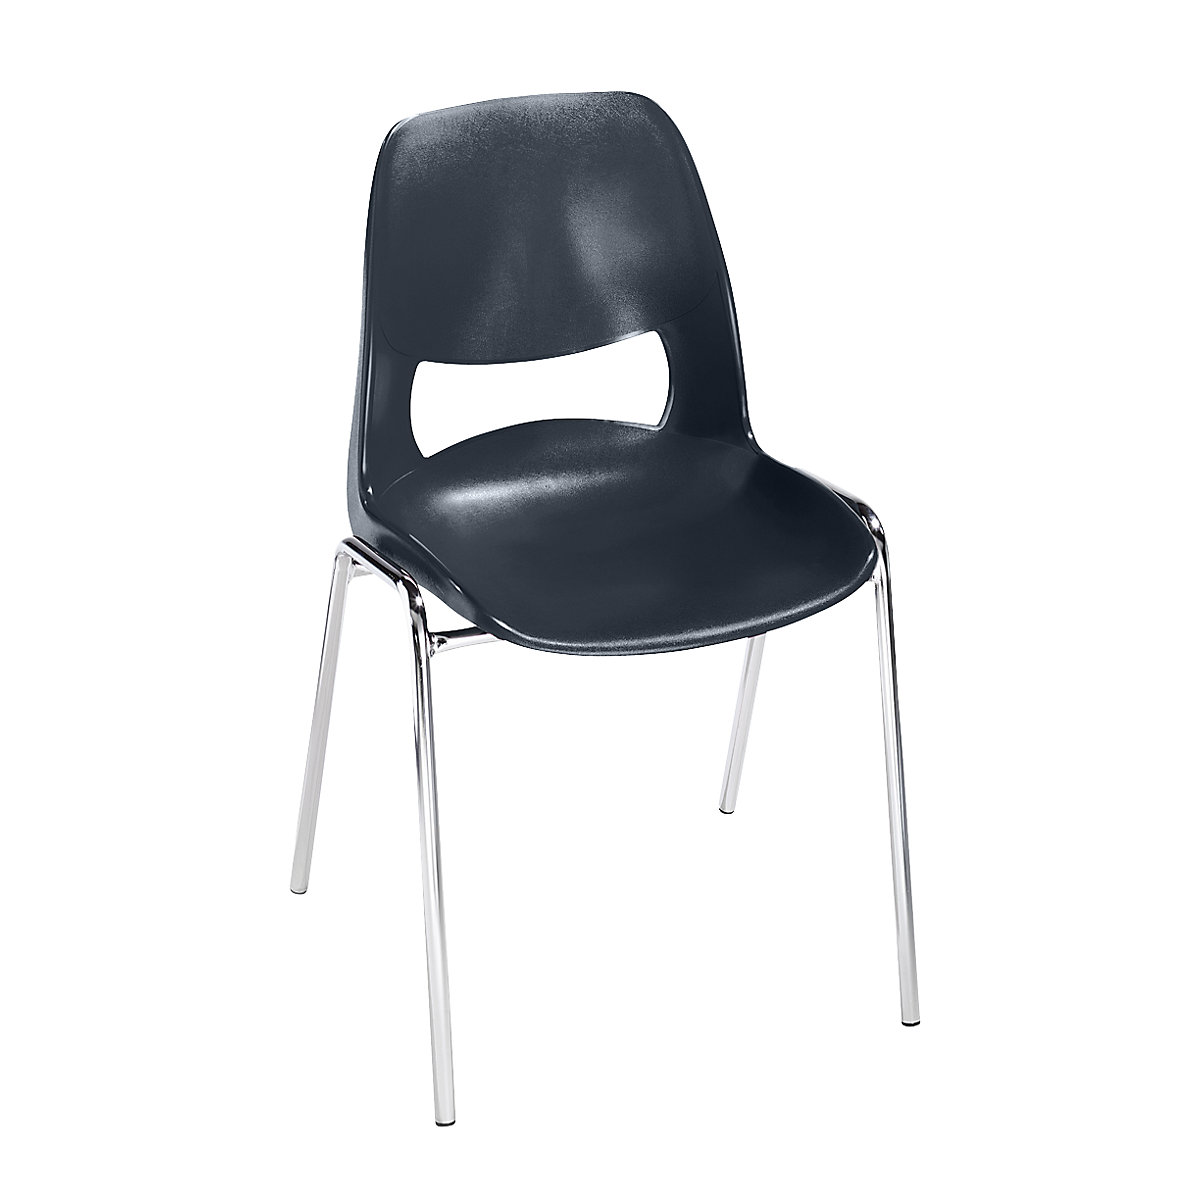 Stacking chair made of polypropylene